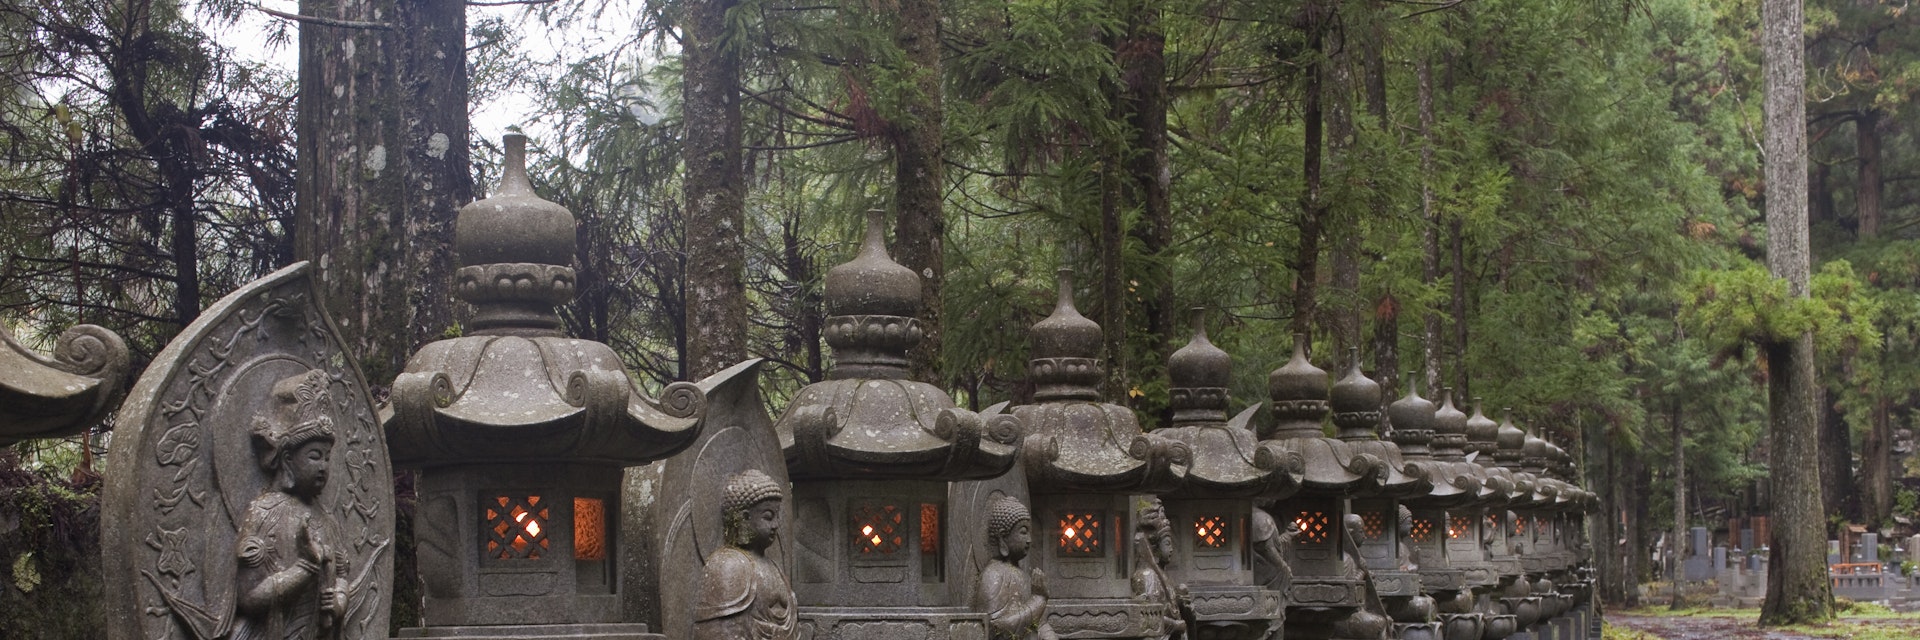 Row of stone lanterns at Oku-no-in cemetery.